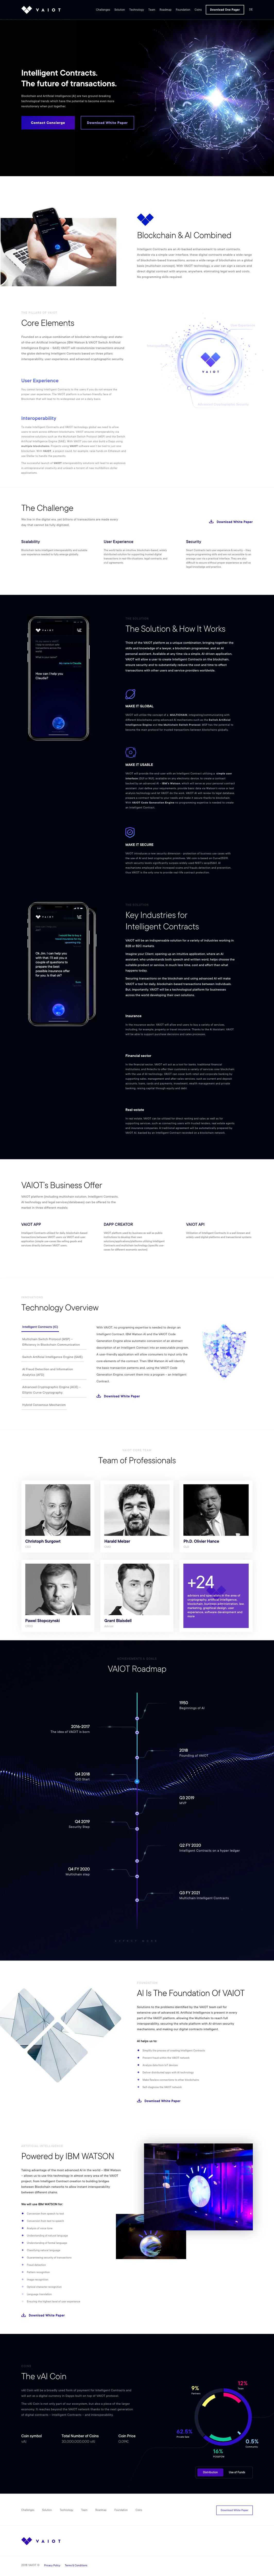 VAIOT Landing Page Example: Blockchain and Artificial Intelligence (AI) are two ground-breaking technological trends which have the potential to become even more revolutionary when put together.